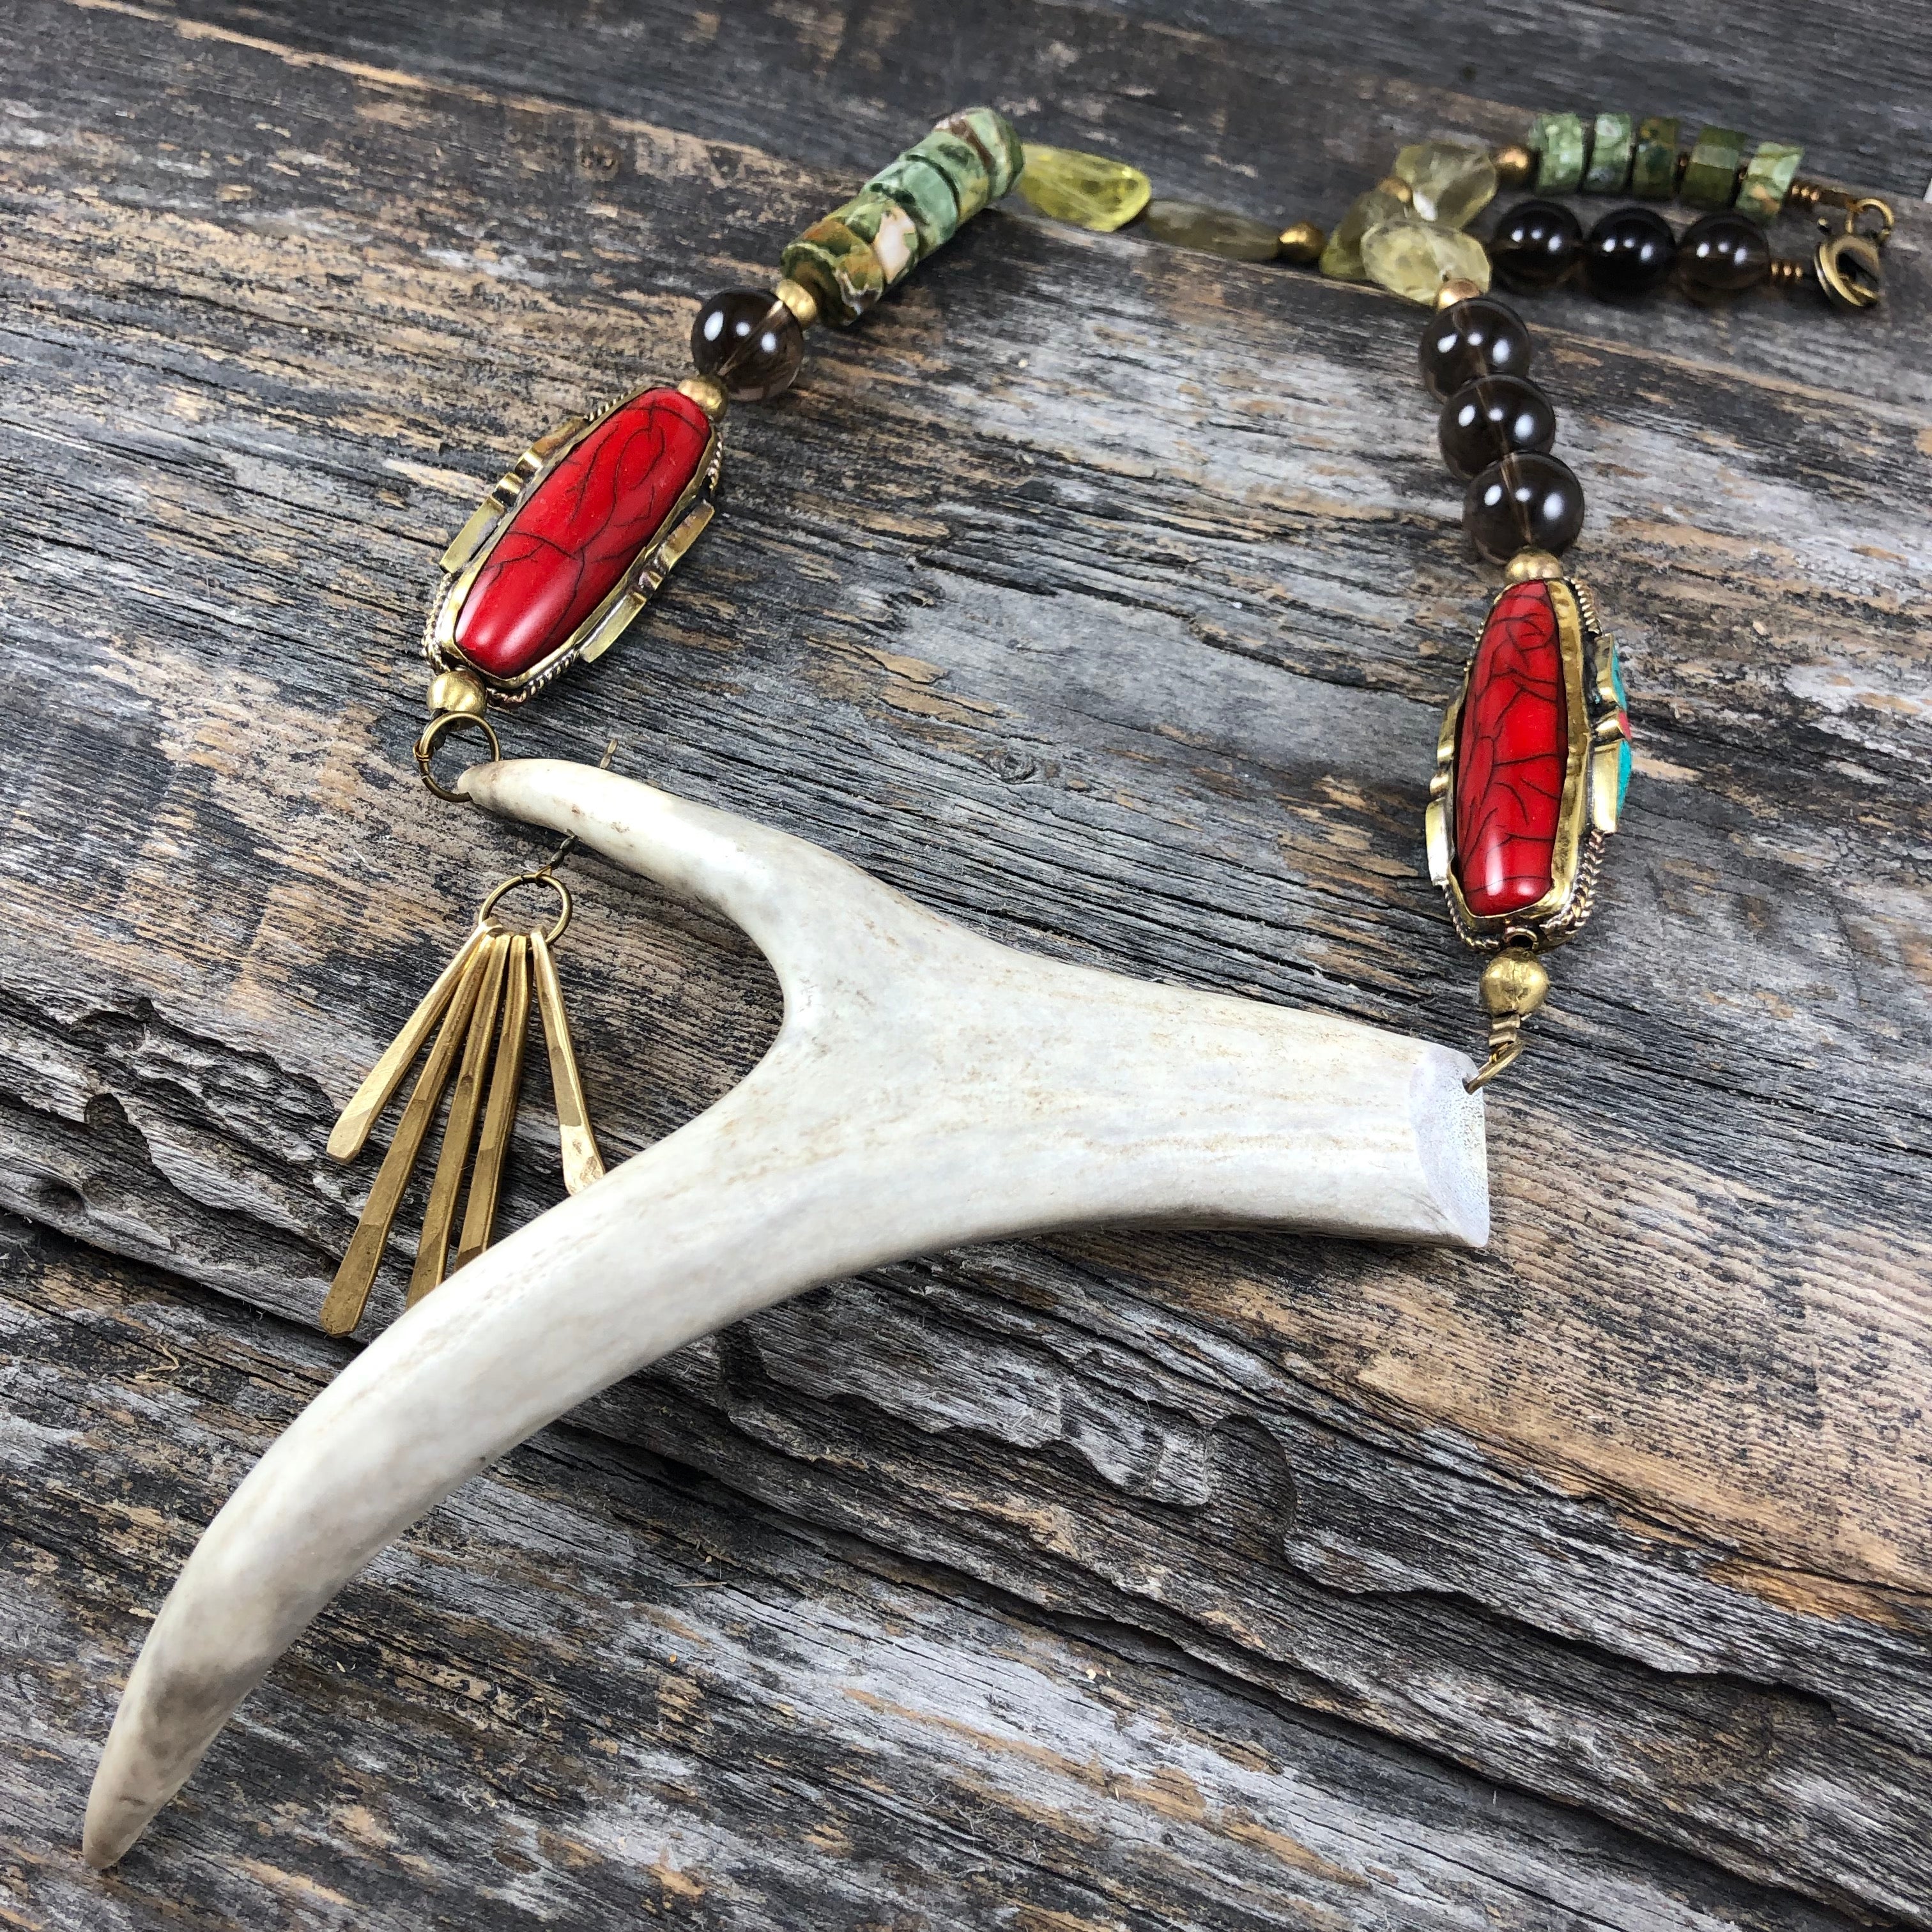 Hook Shed Antler Necklace/Hanger/Keychain 2.75 (7Y83XDWS3) by 3DBG